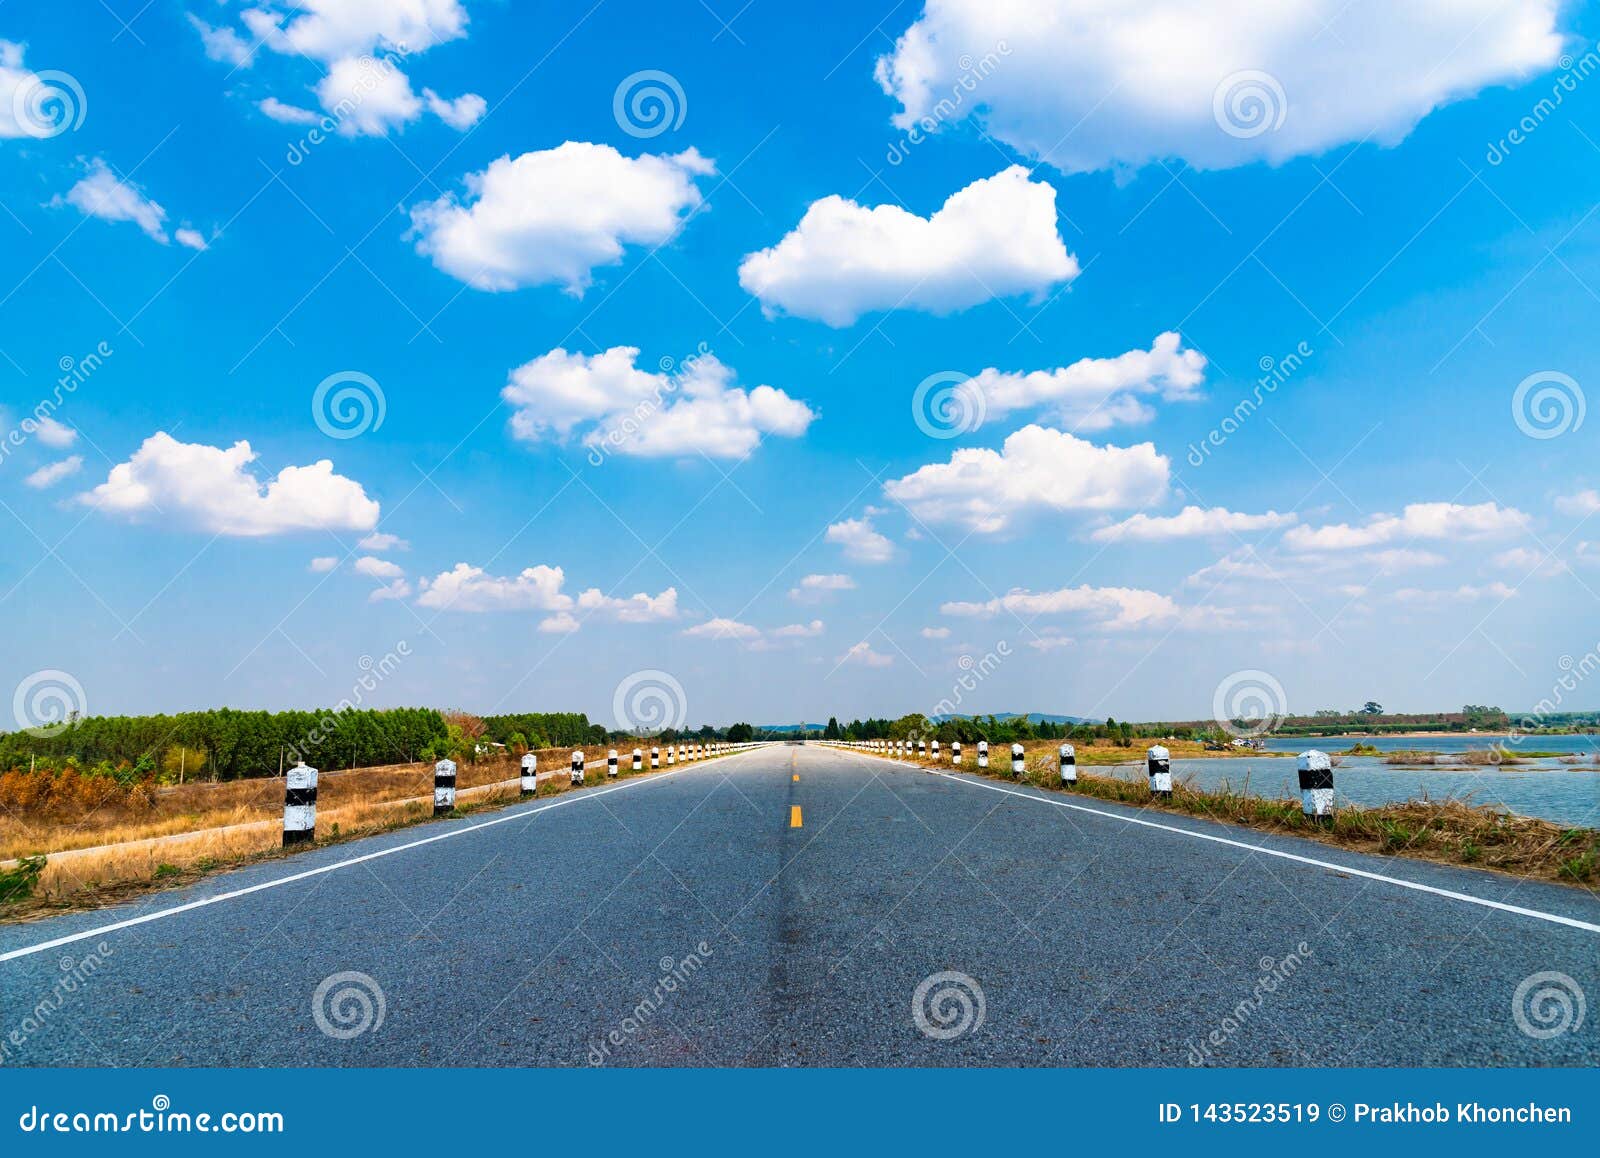 Blue Sky Background with Clouds and Empty Road Stock Image - Image of  color, meteorology: 143523519